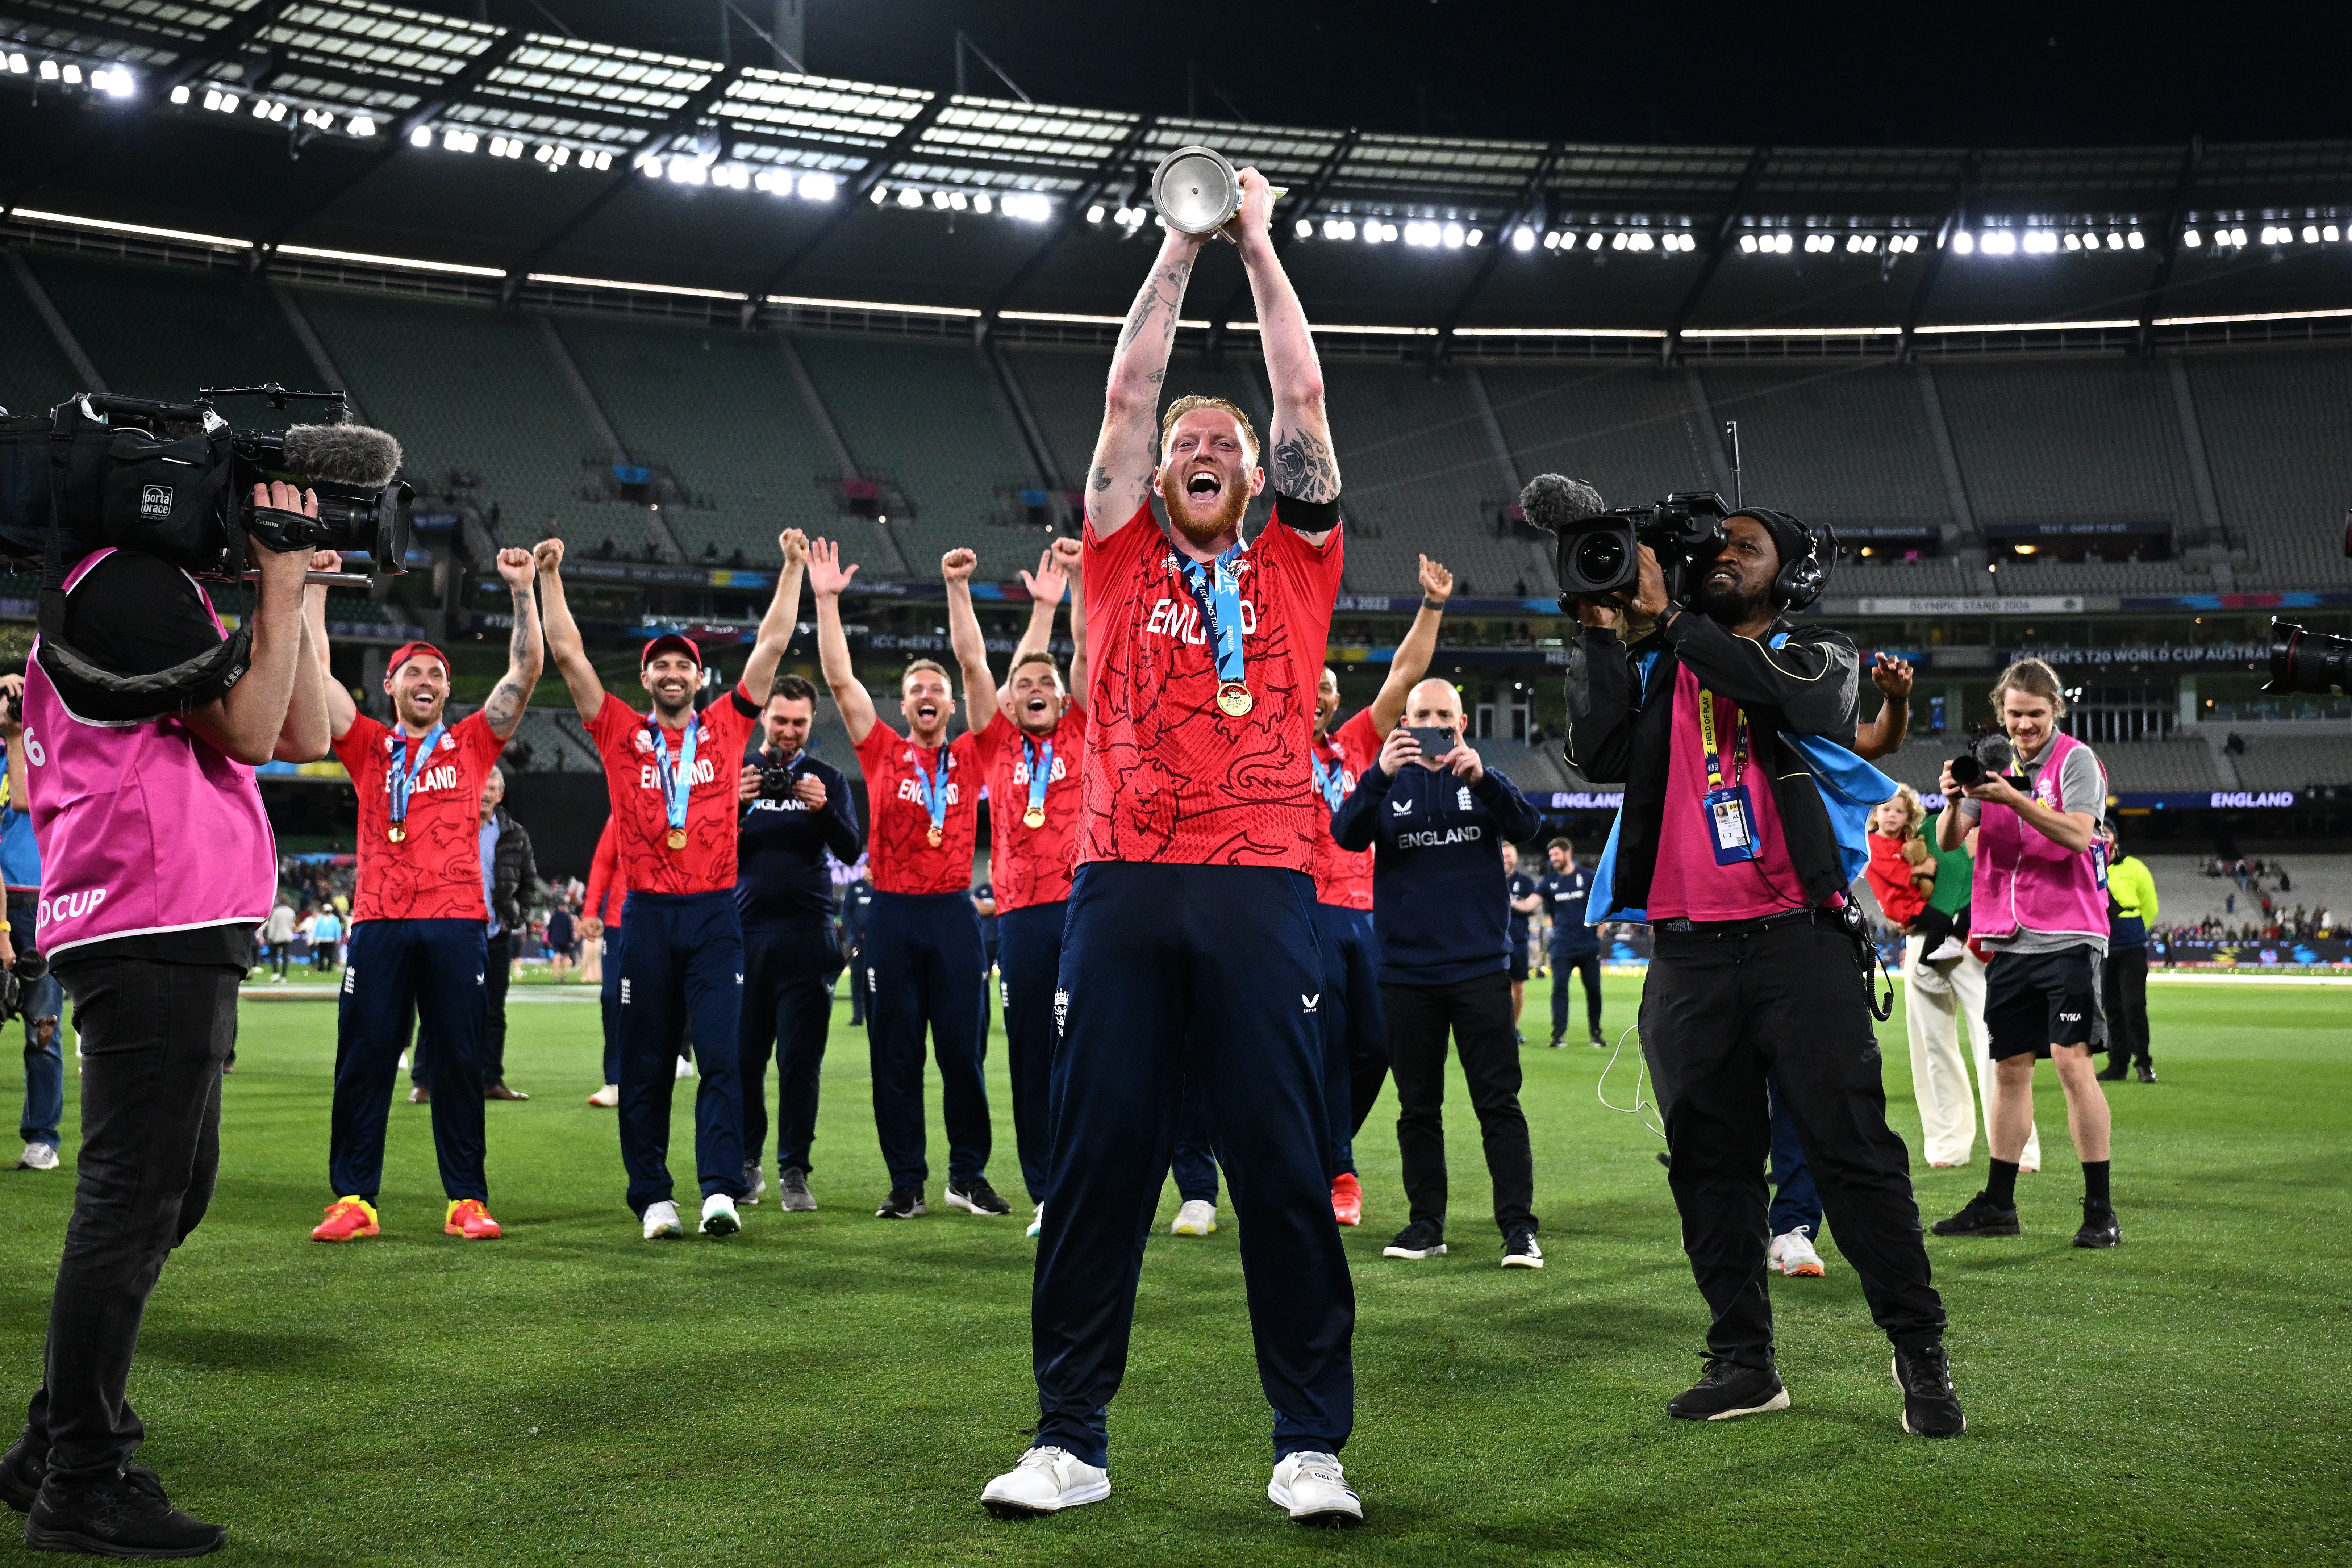 England’s Ben Stokes celebrates winning the T20 World Cup final (PA).